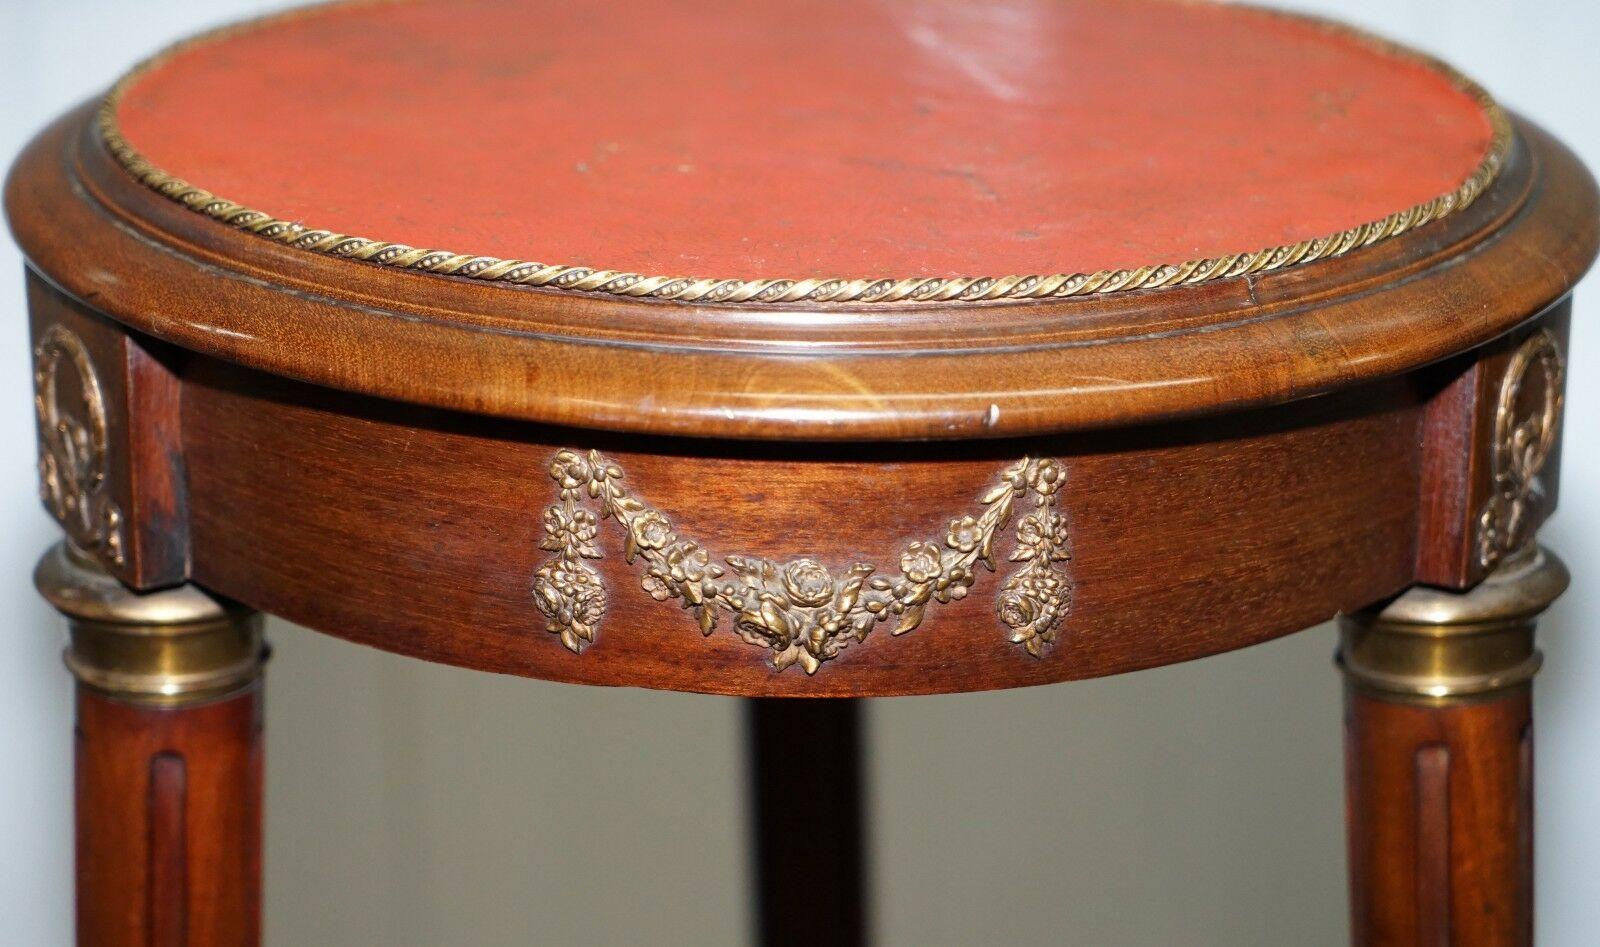 Hand-Crafted 19th Century French Empire Hardwood Jardinière Bust Pot Stand Leather Top Brass